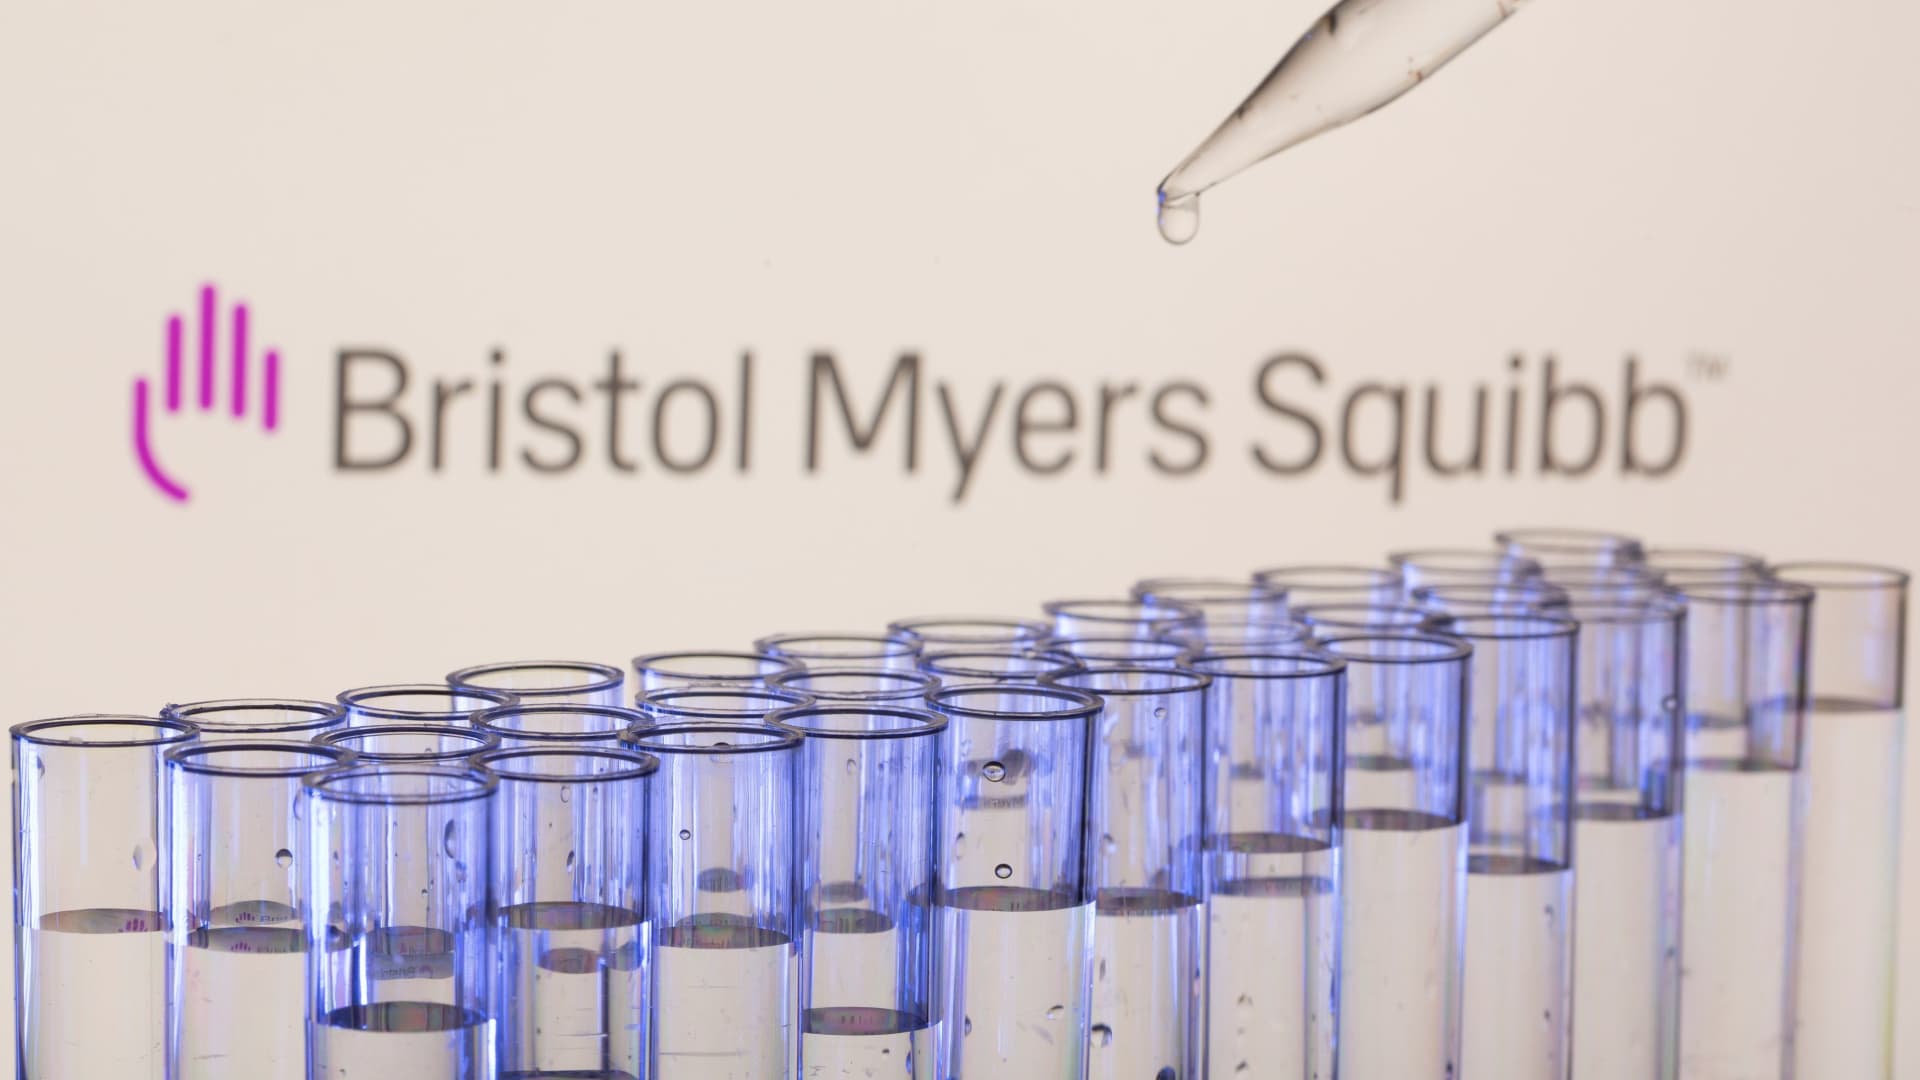 Bristol-Myers Squibb, Twitter, Gilead Sciences and more